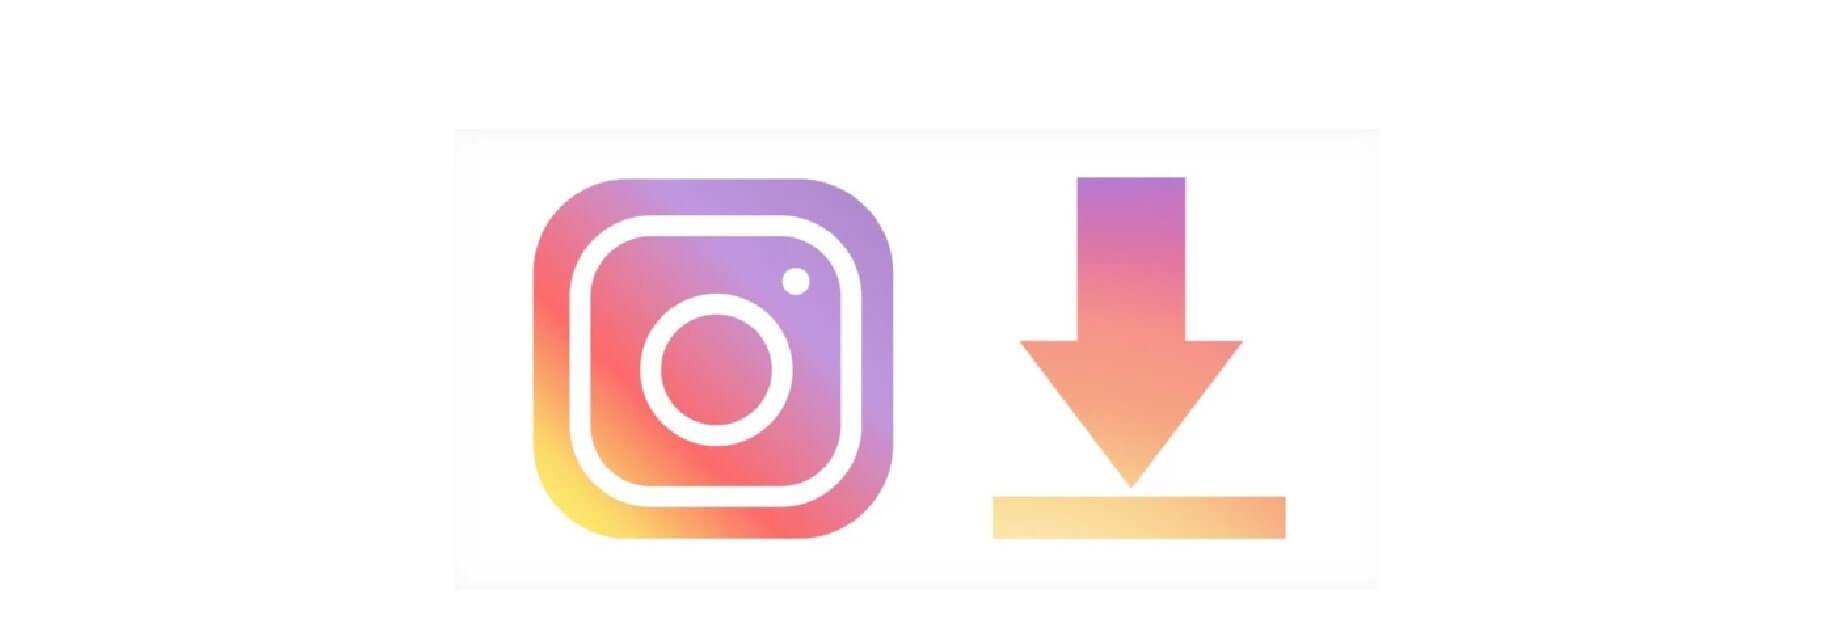 How to download your Instagram account data